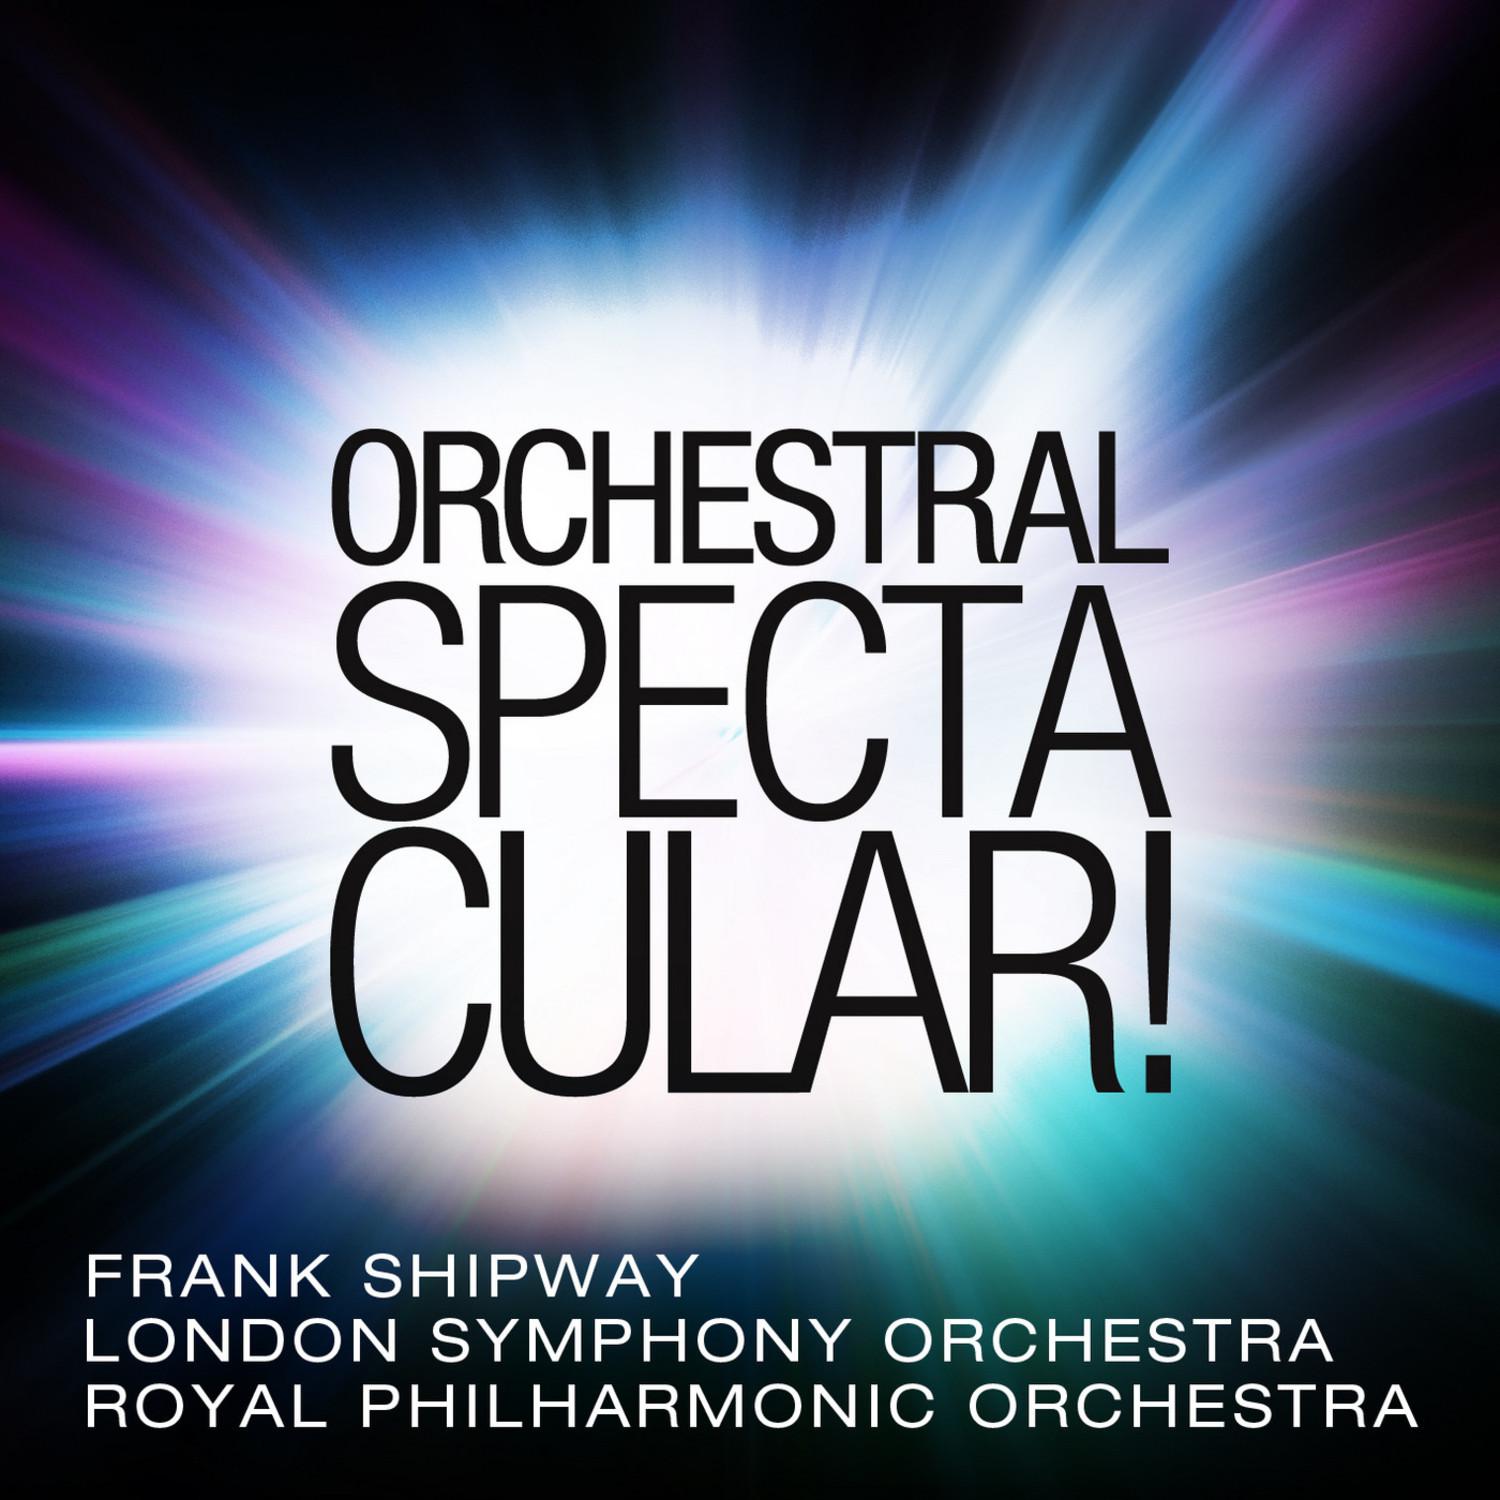 Orchestral Spectacular!